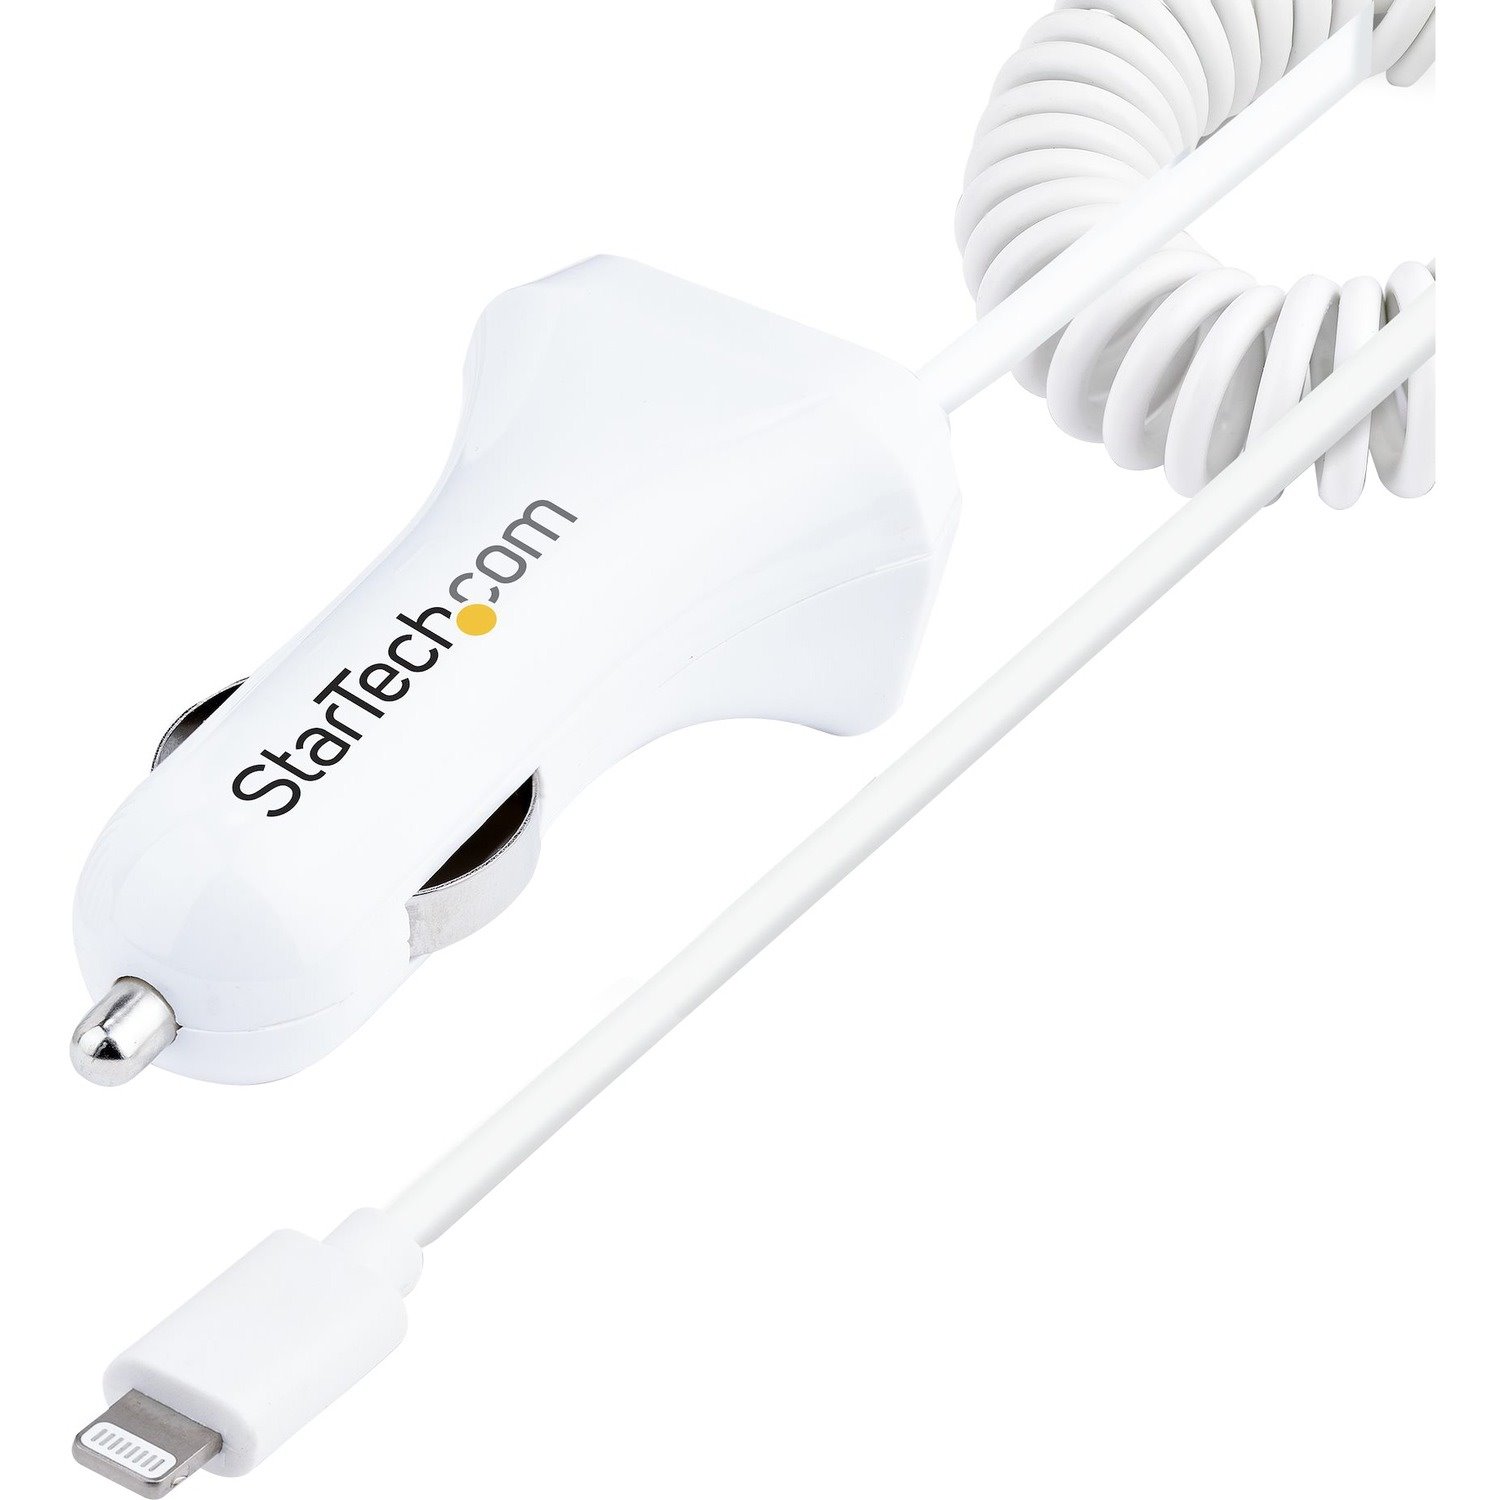 StarTech.com Lightning Car Charger with Coiled Cable, 1m Built-in Cable, 12W, White, 2 Port USB Car Charger Adapter, In Car iPhone Charger